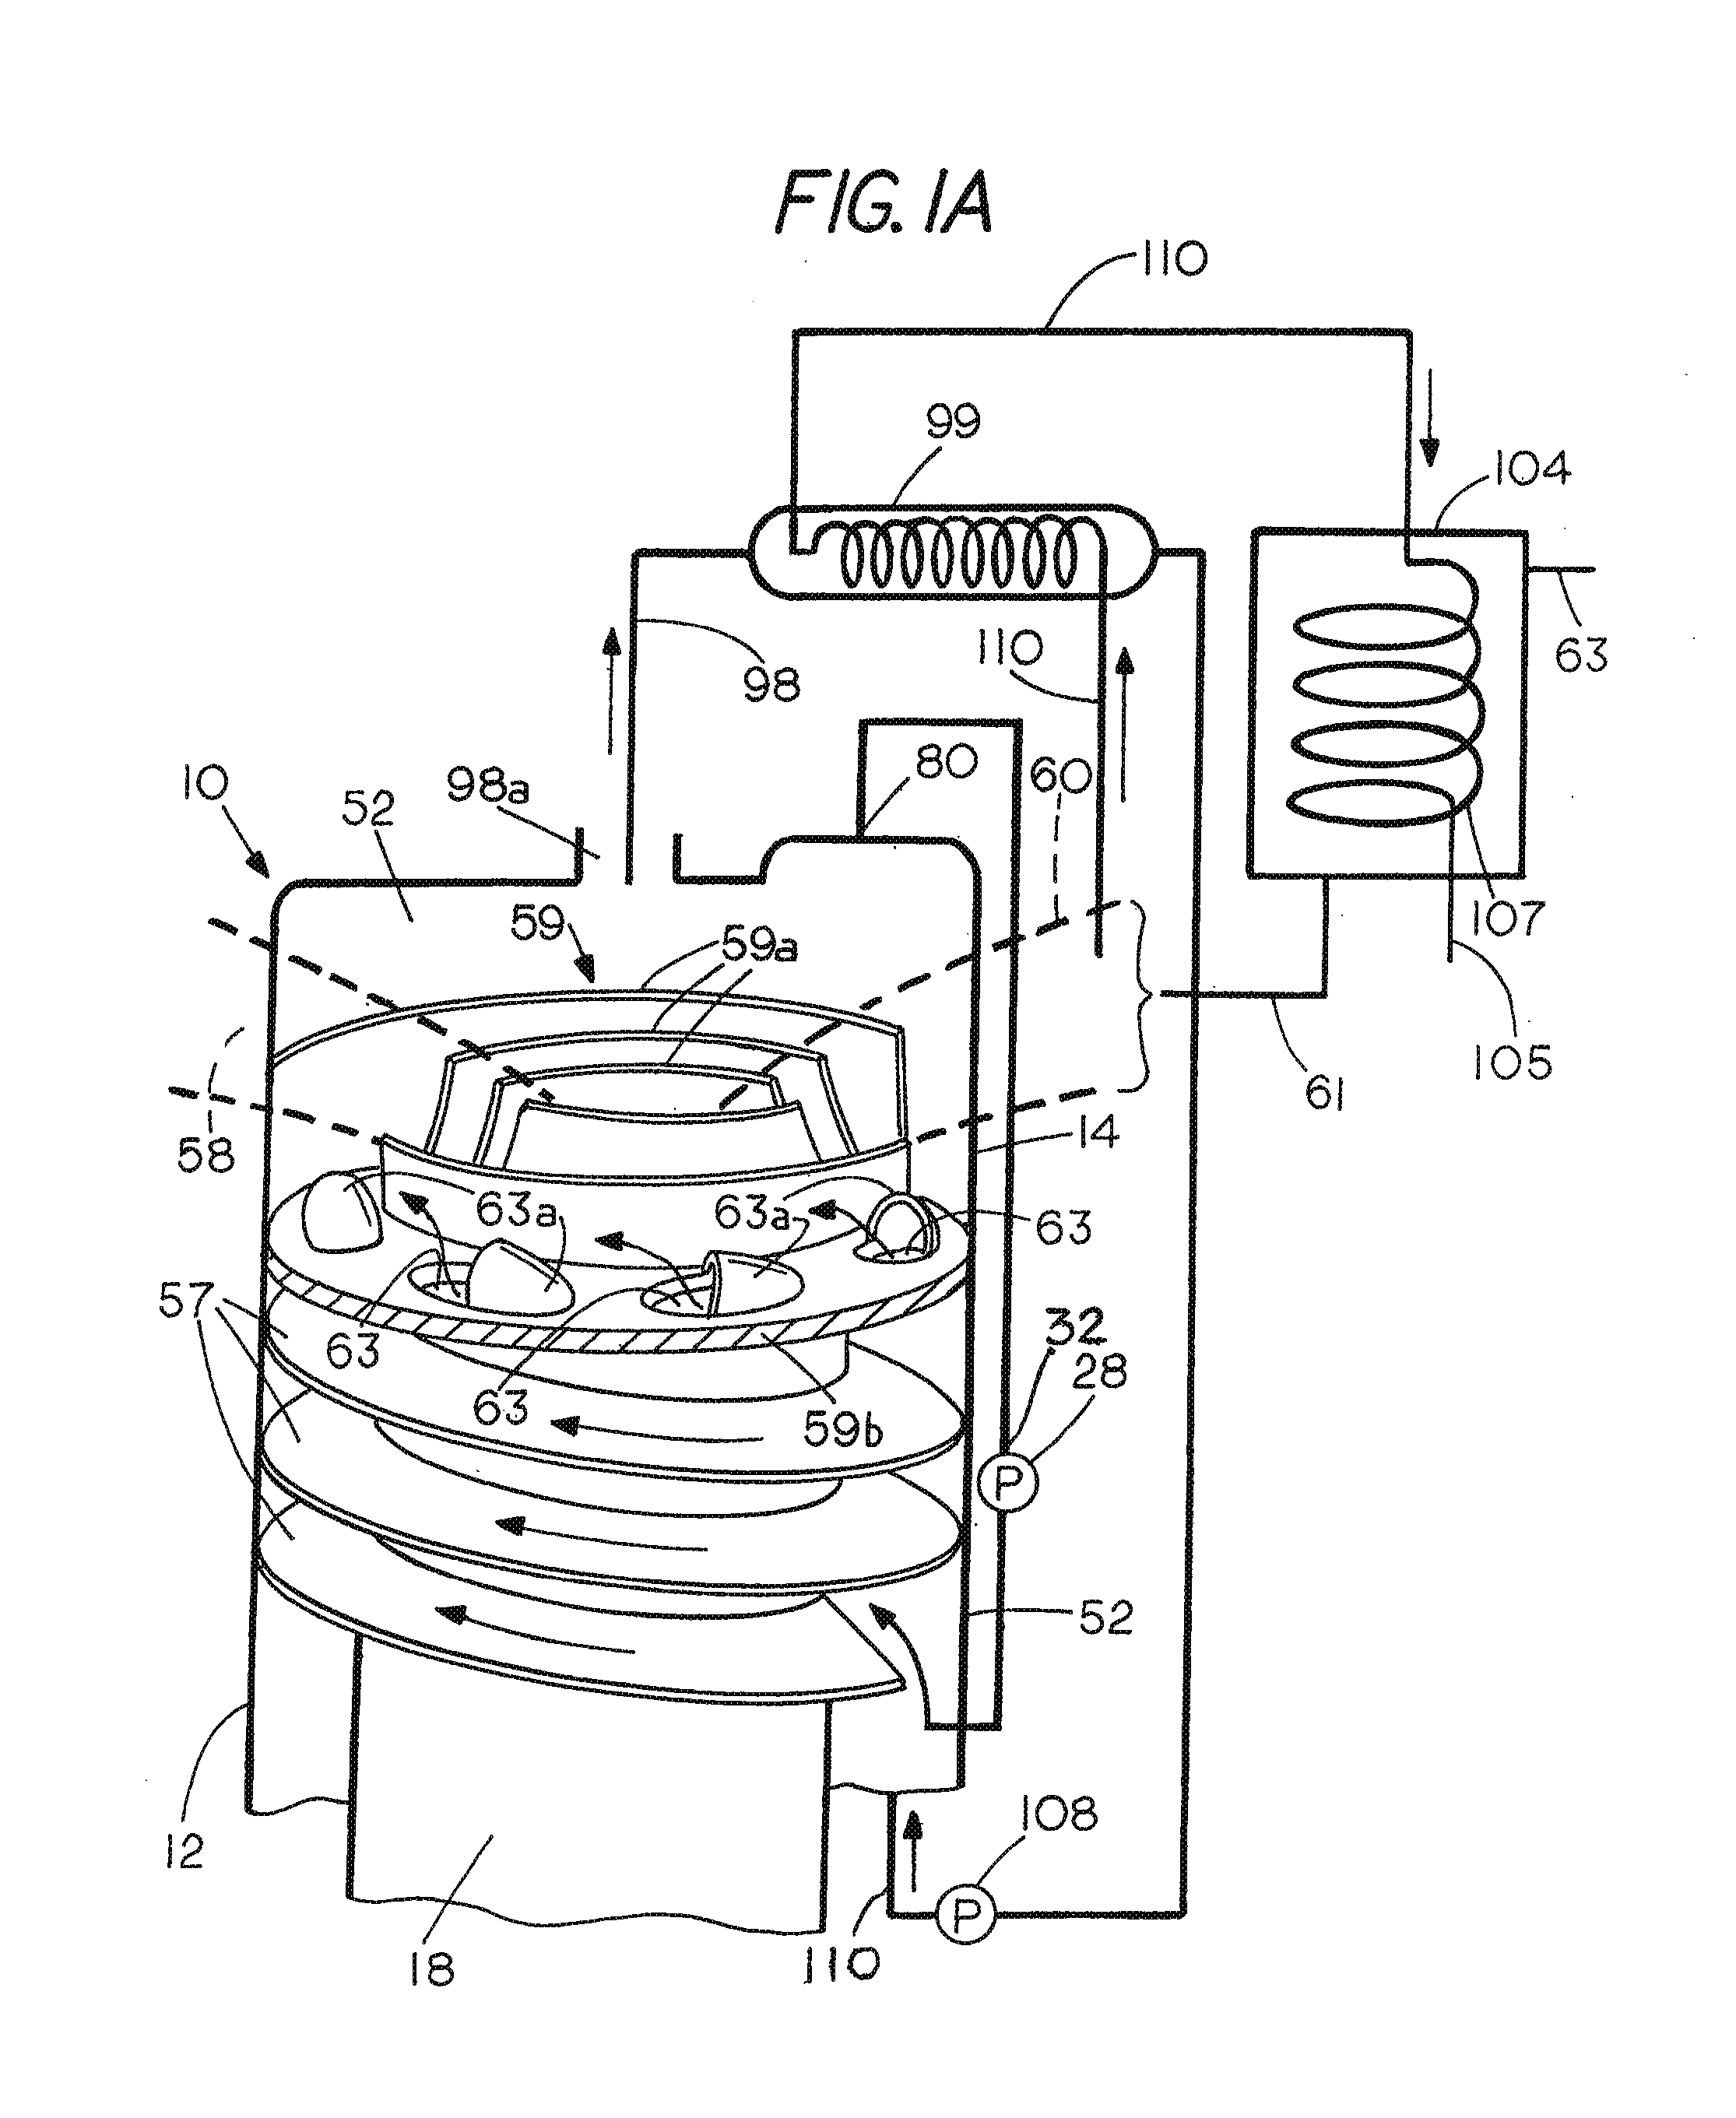 High efficiency dual cycle internal combustion steam engine and method